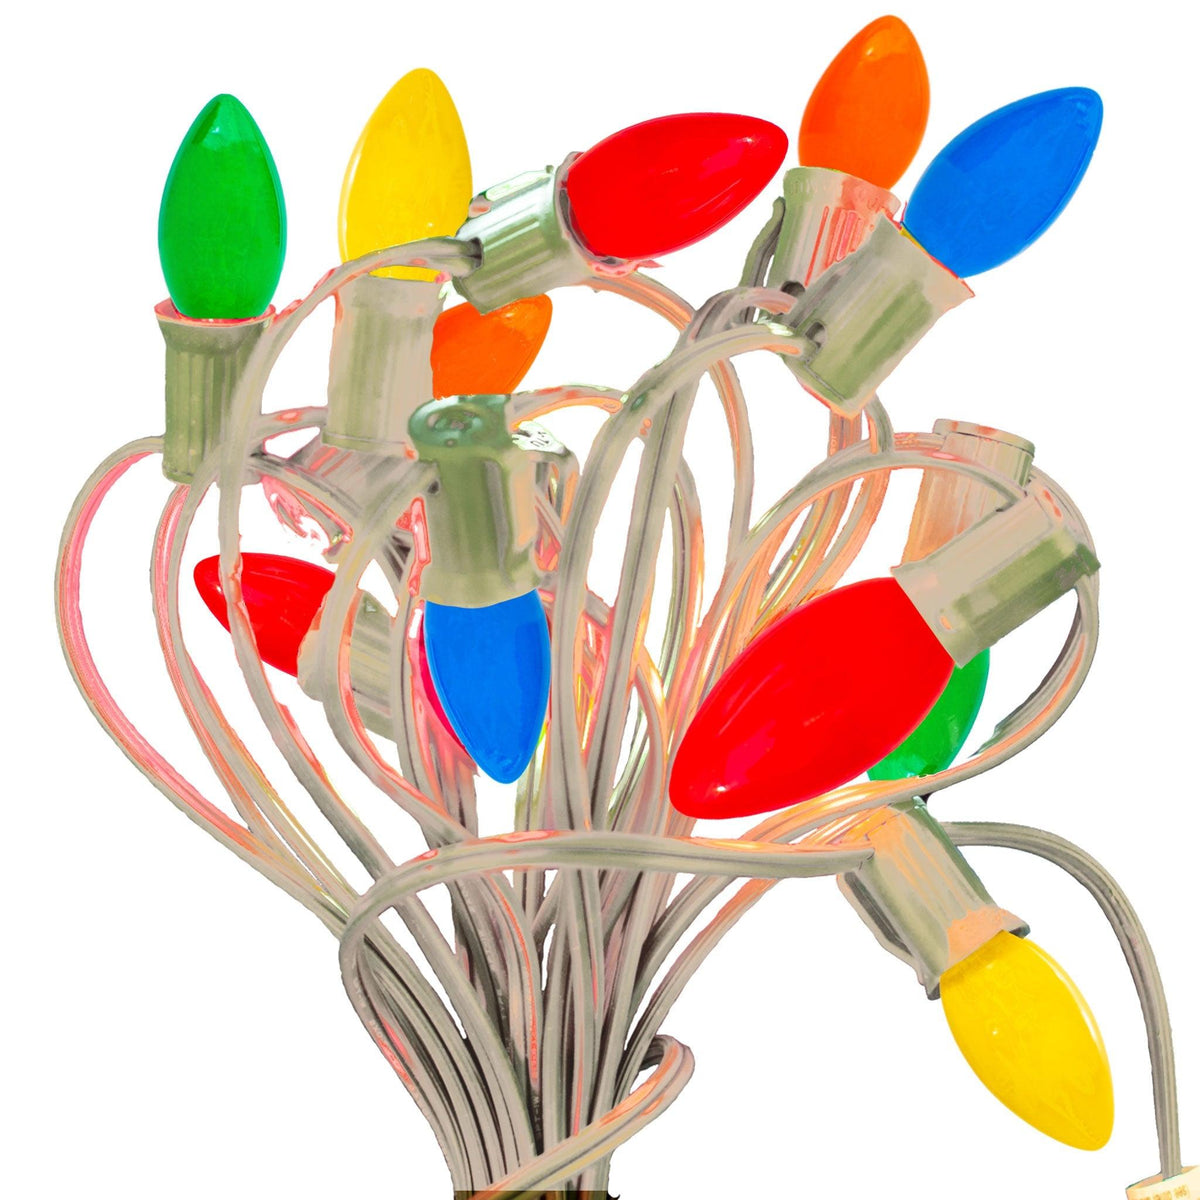 Lee Display's classic C-7 & C-9 Ceramic Multi-Color Christmas Lights are sold in boxes of 25 Bulbs